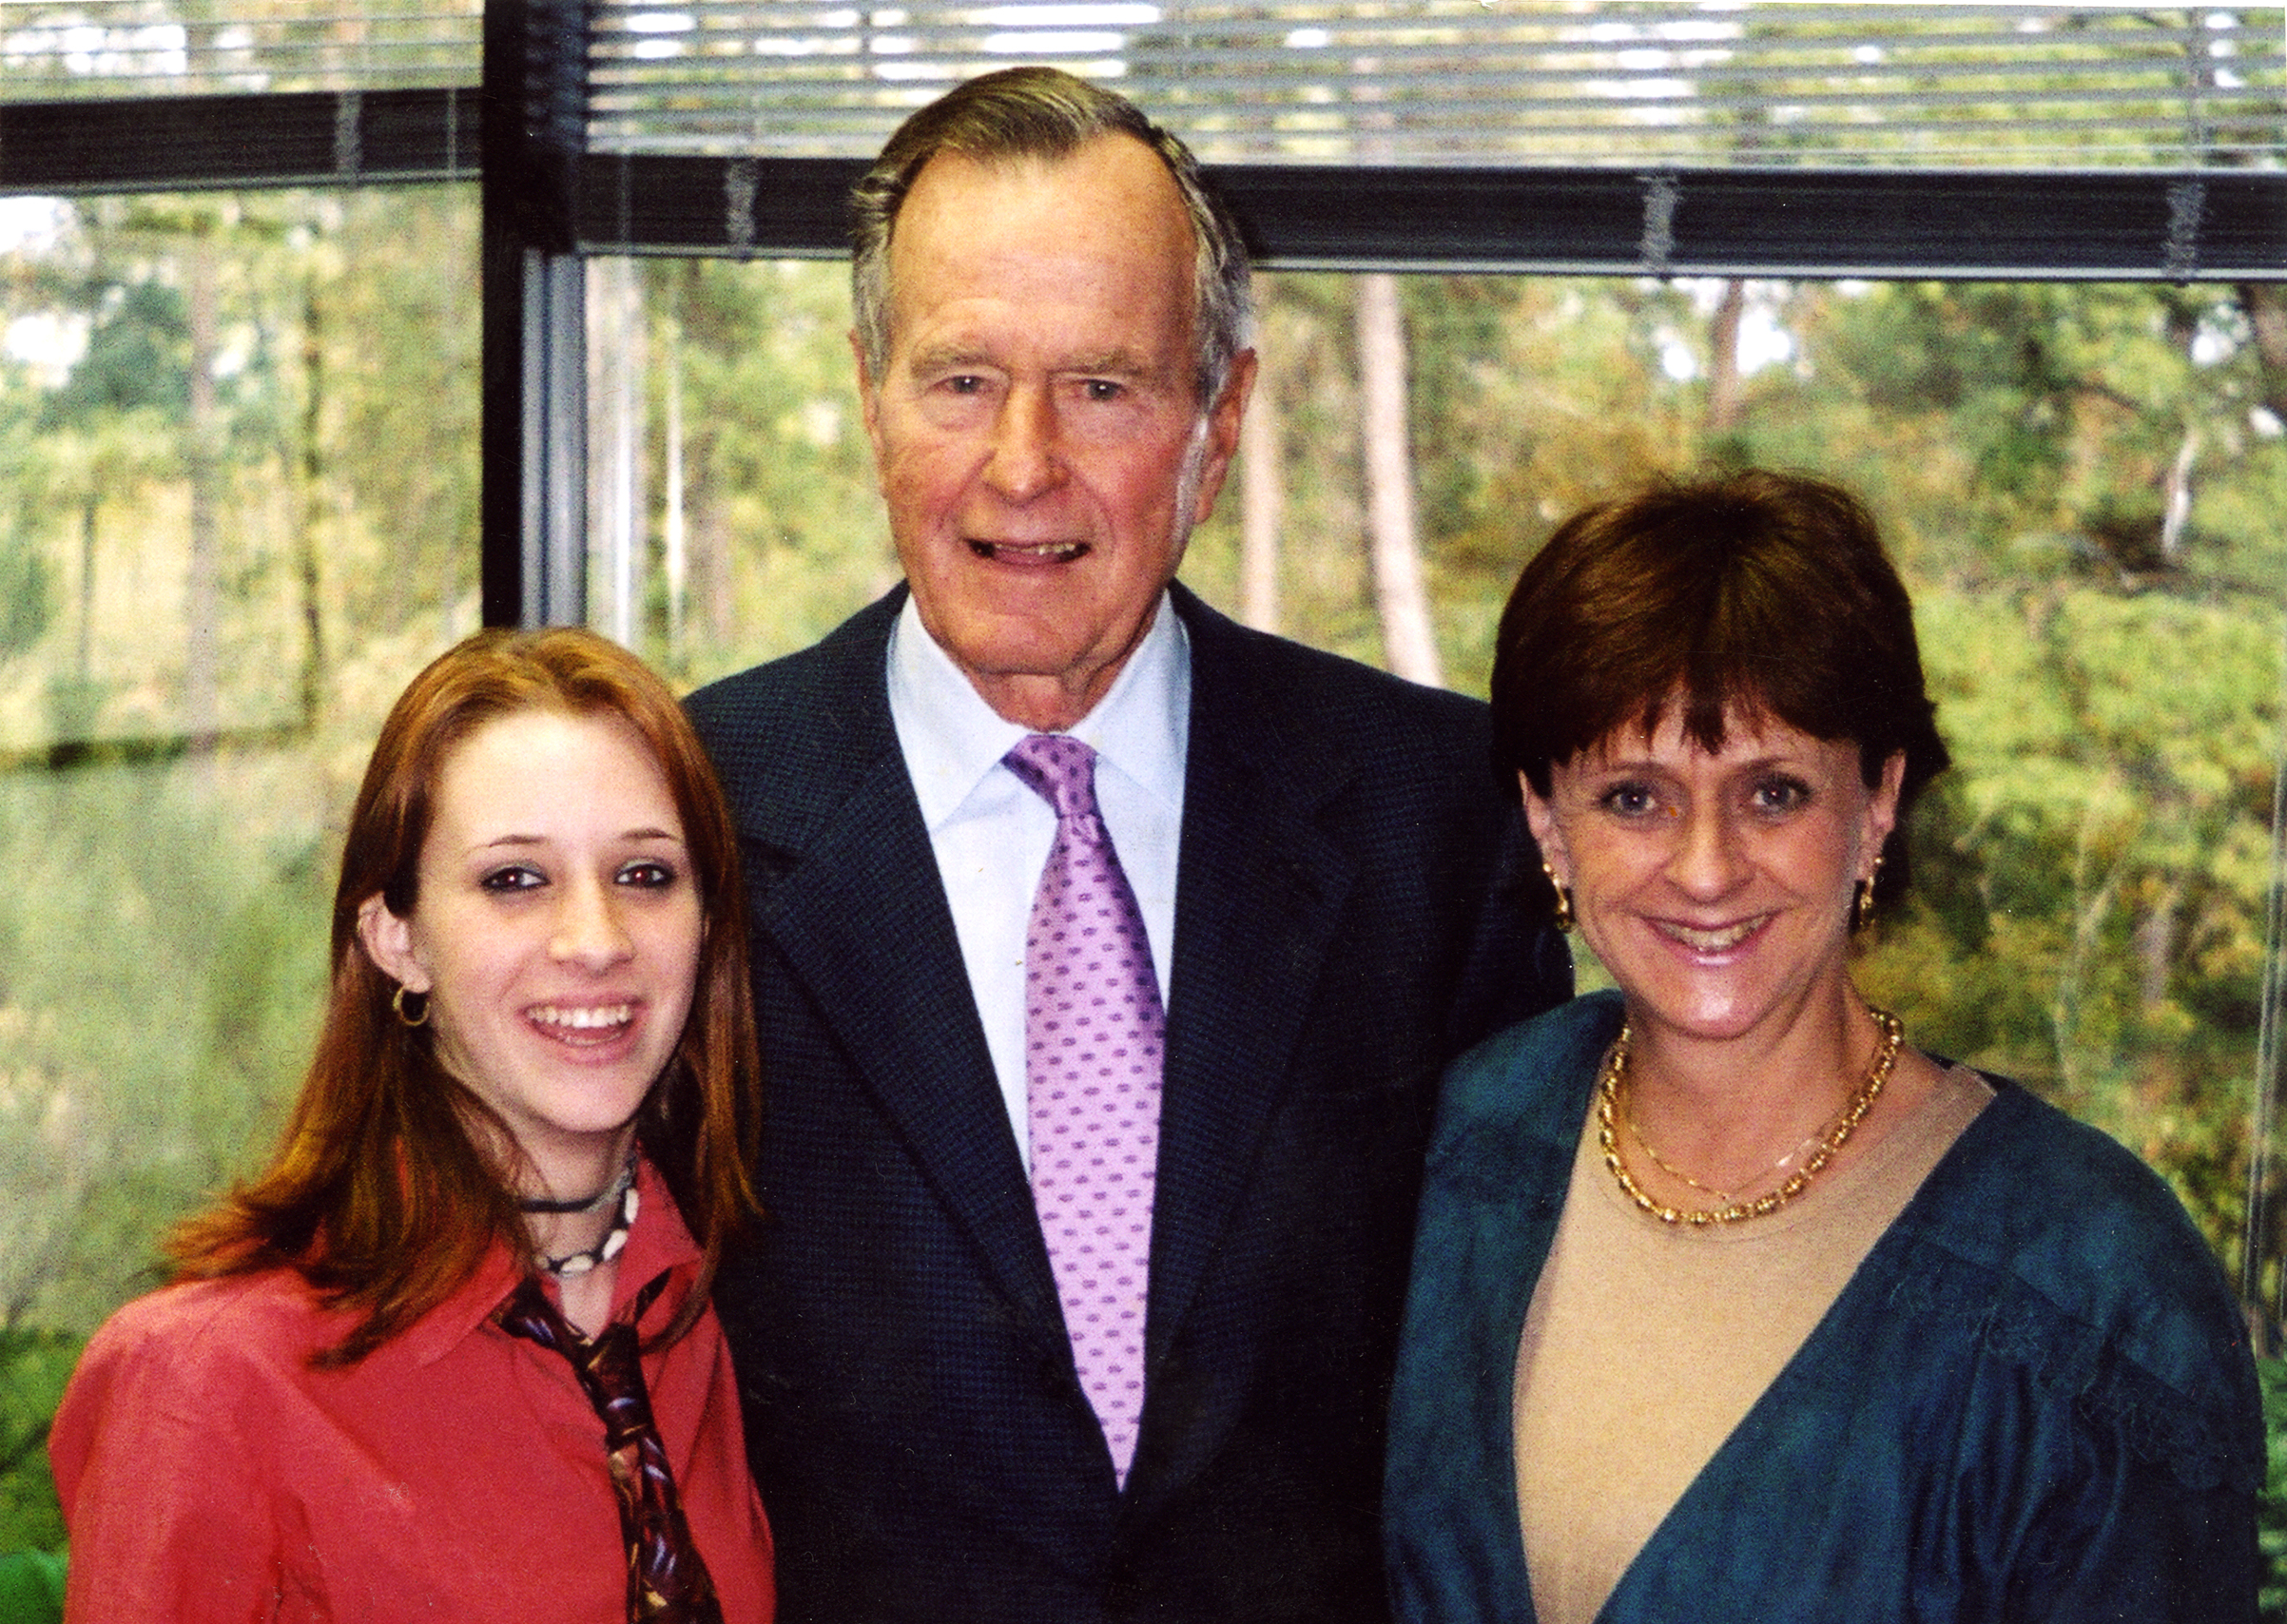 Roslyn Corrigan (L), former president George H.W. Bush (C) and Sari Young (R) at the November 2003 event where Corrigan says Bush groped her. (Courtesy Corrigan Family)